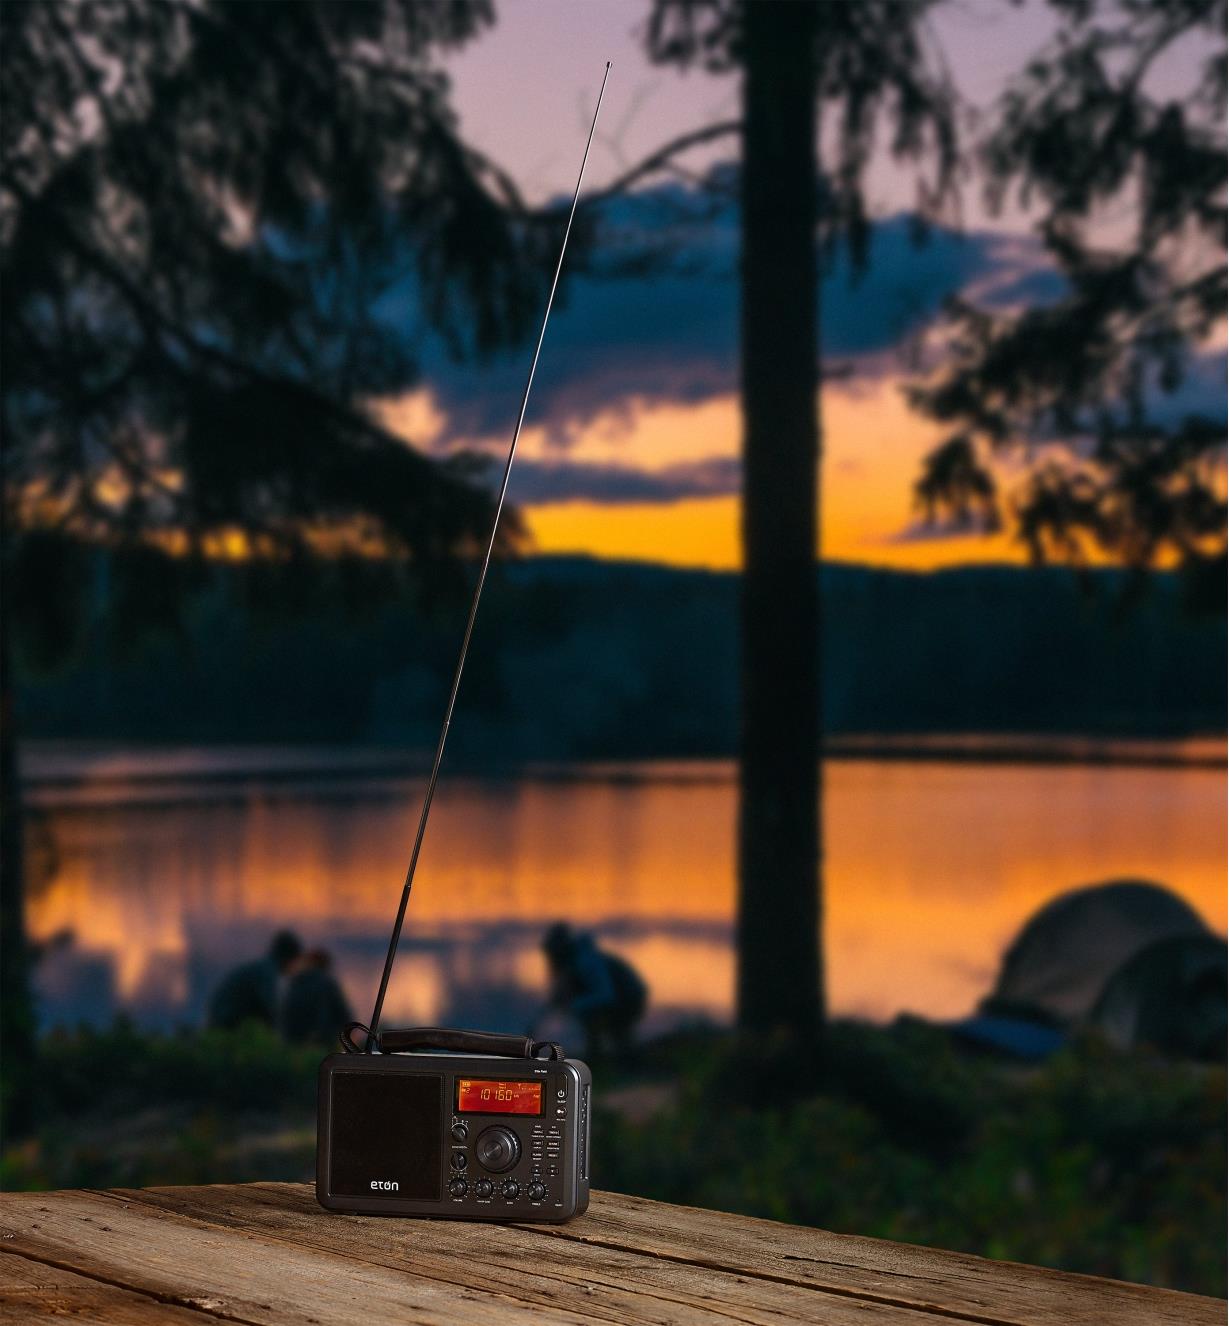 Eton AM/FM shortwave radio at a remote campsite with telescoping antenna extended for better reception